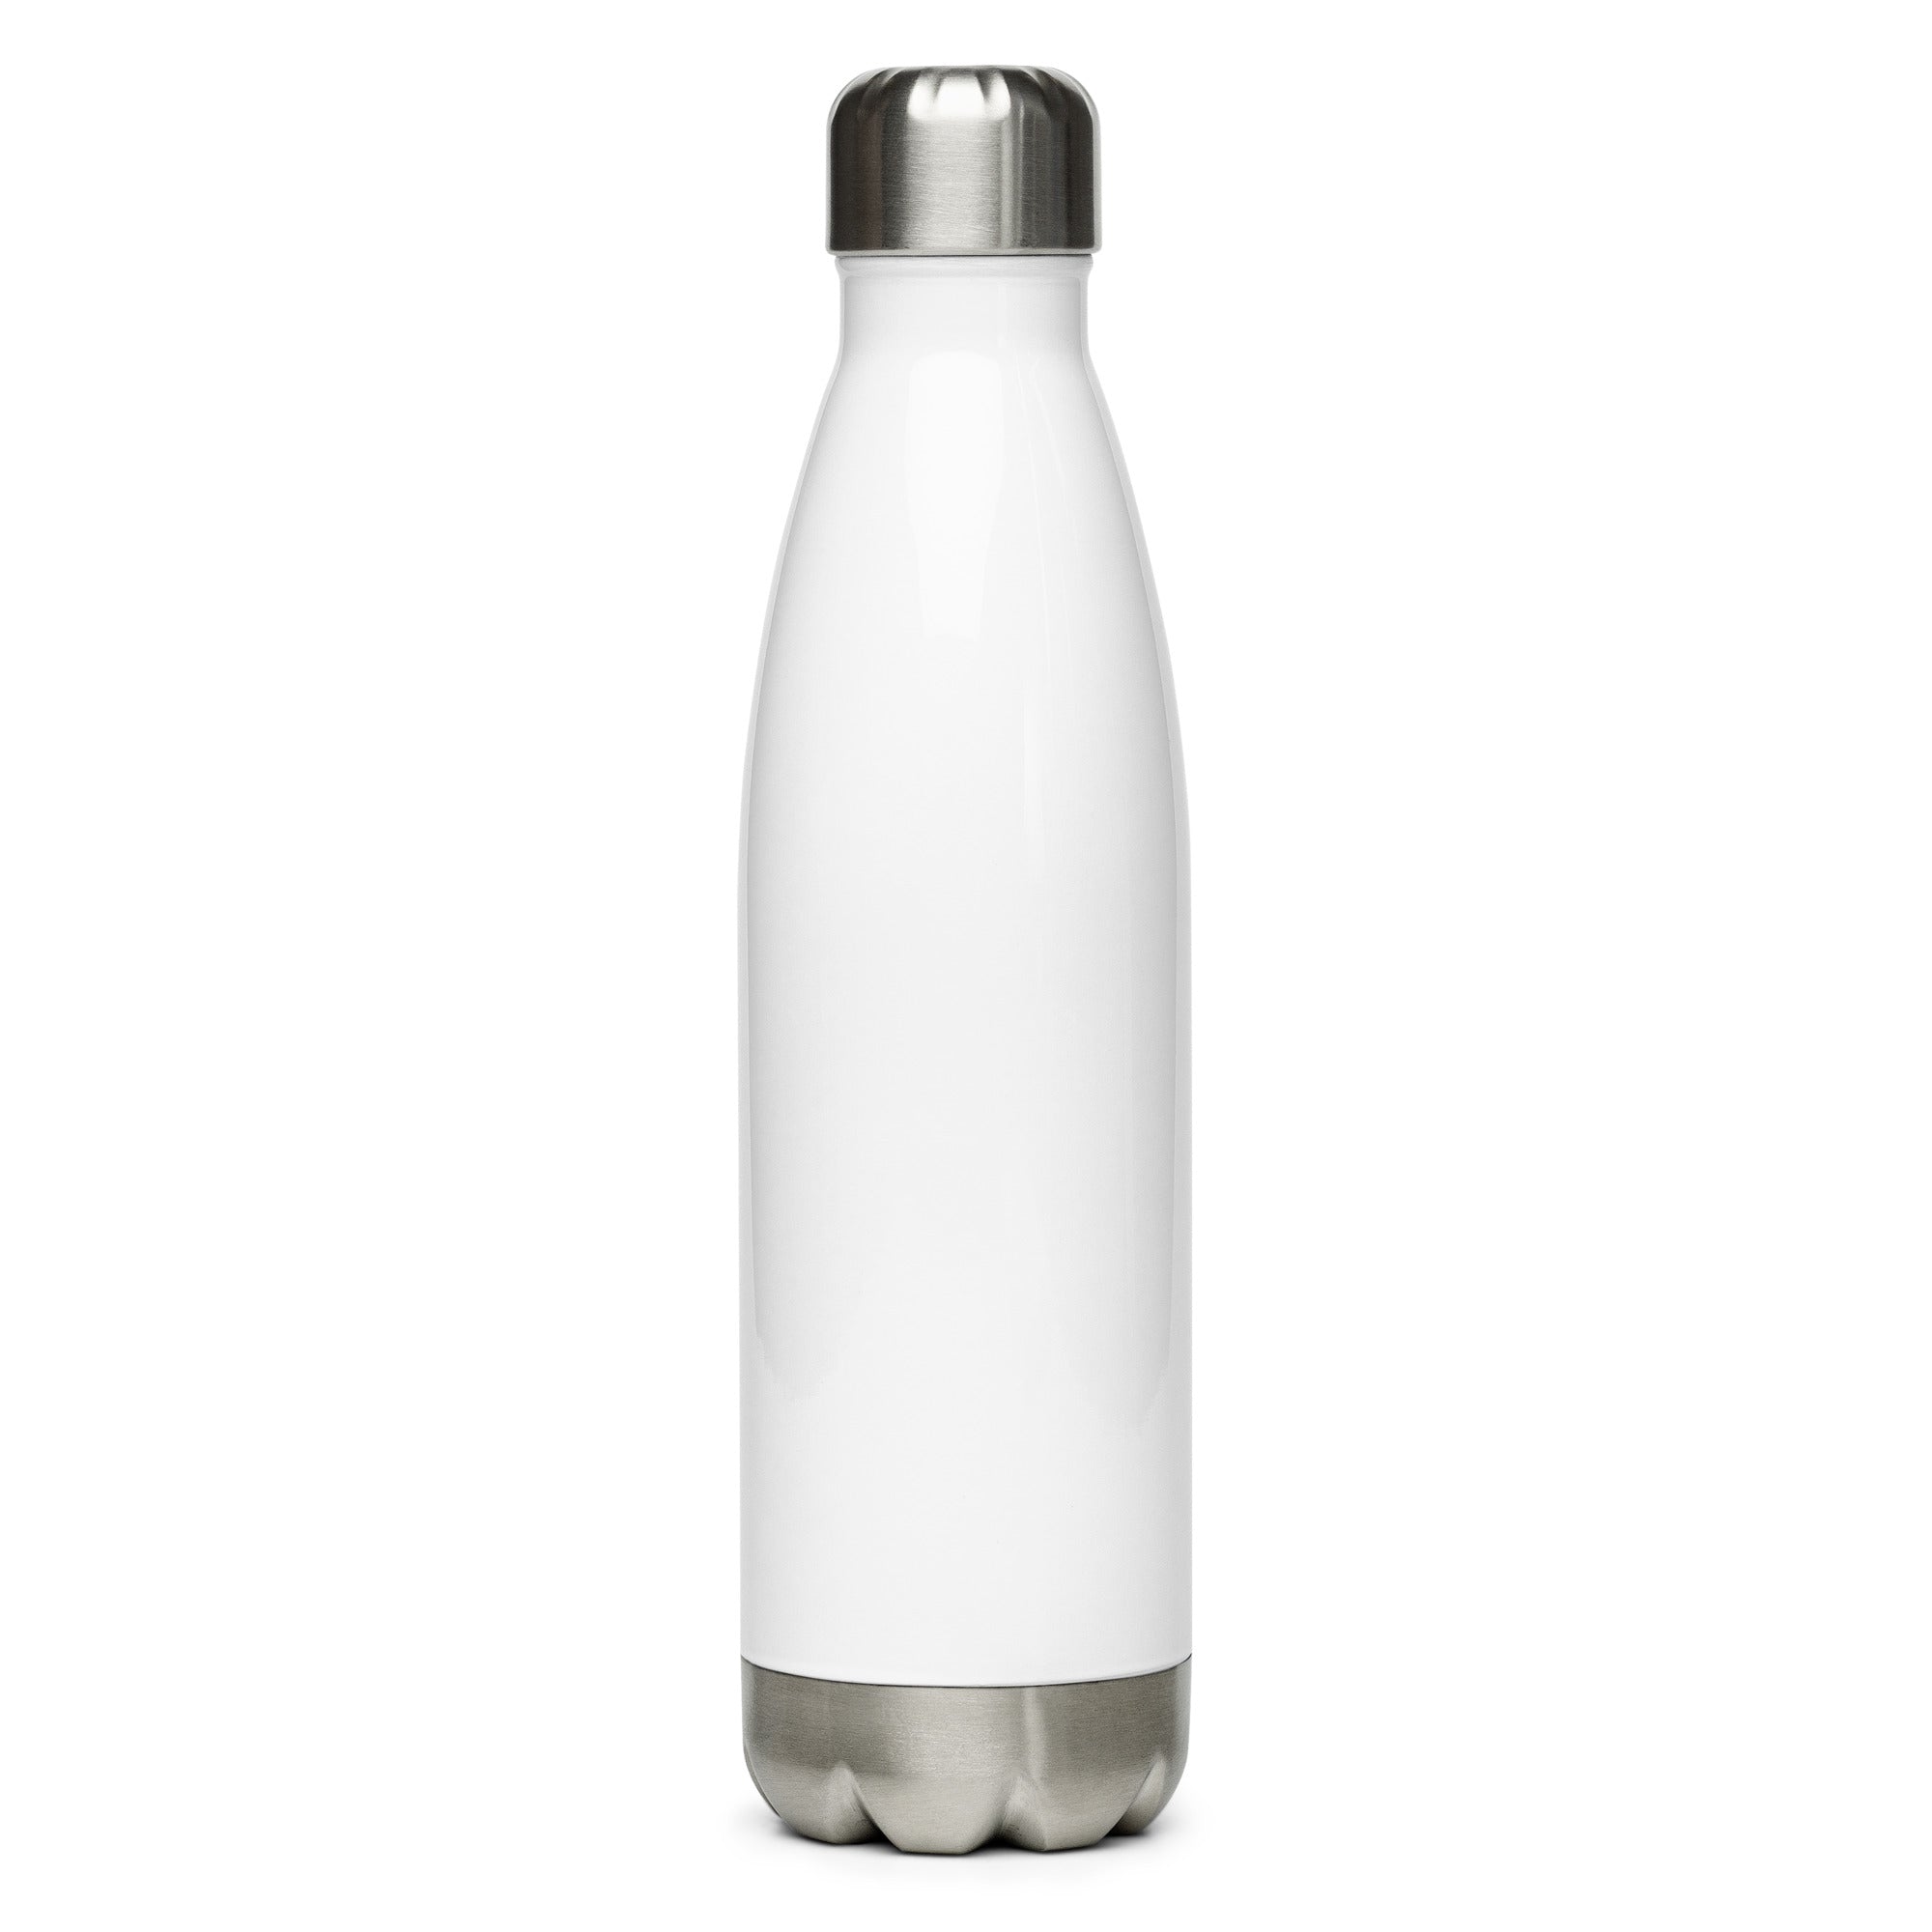 Way Truth Life Radio Stainless Steel Water Bottle